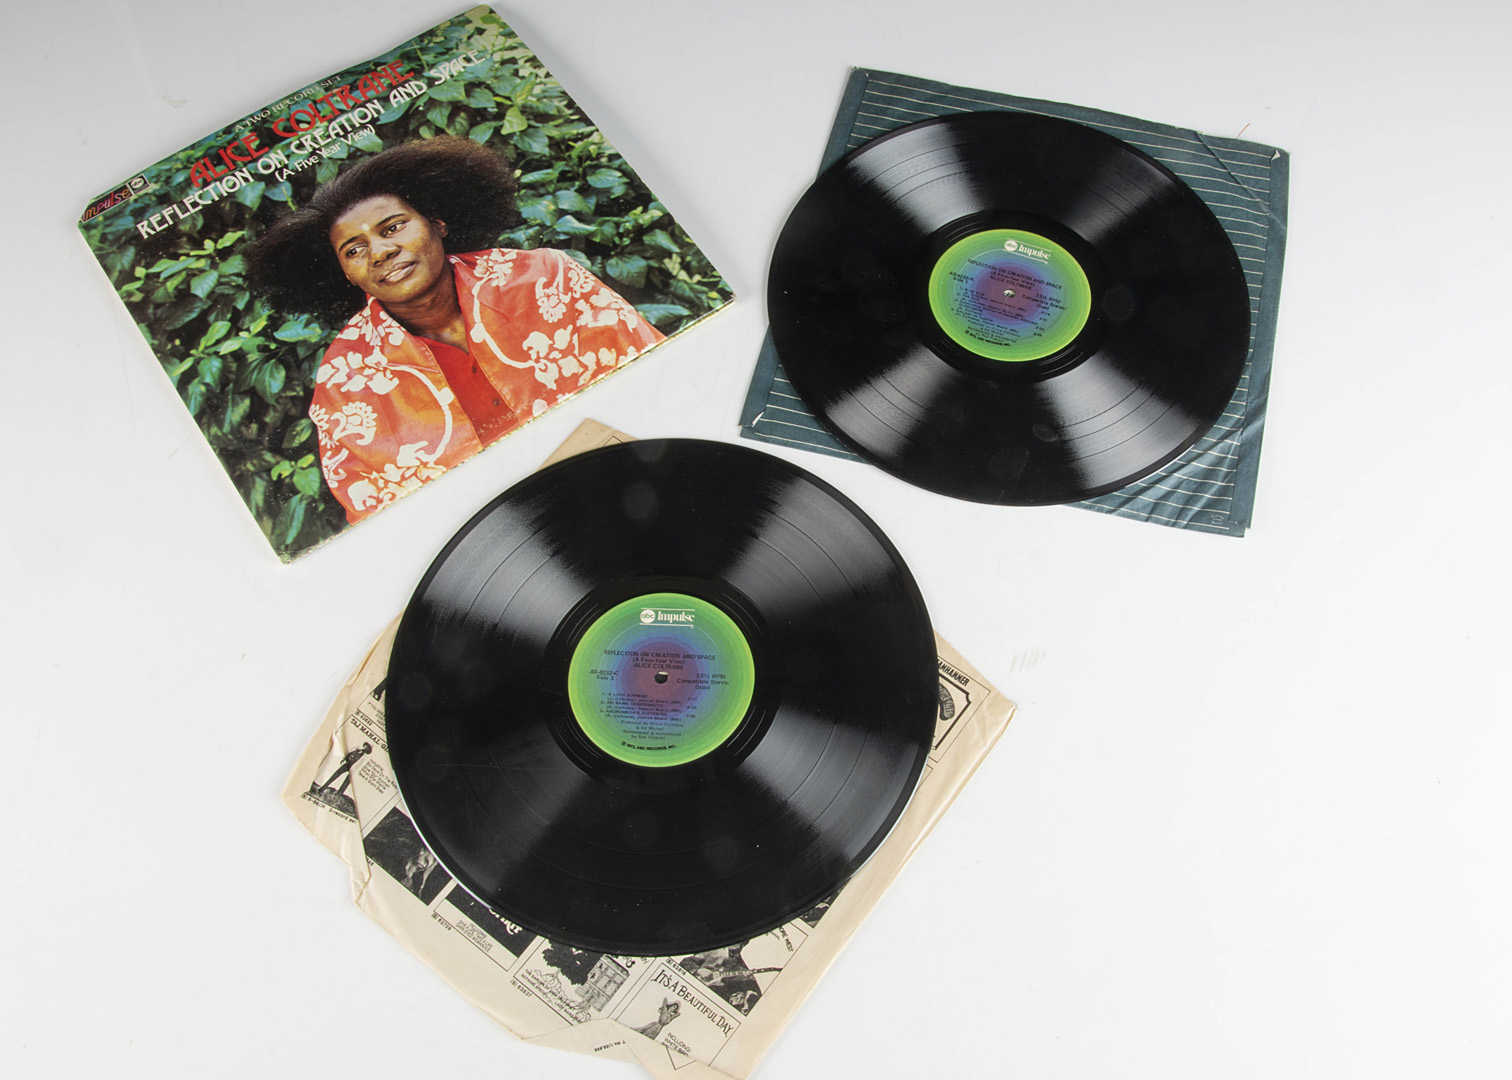 Alice Coltrane LP, Reflection of Creation and Space Double LP - Original USA stereo / Quad release